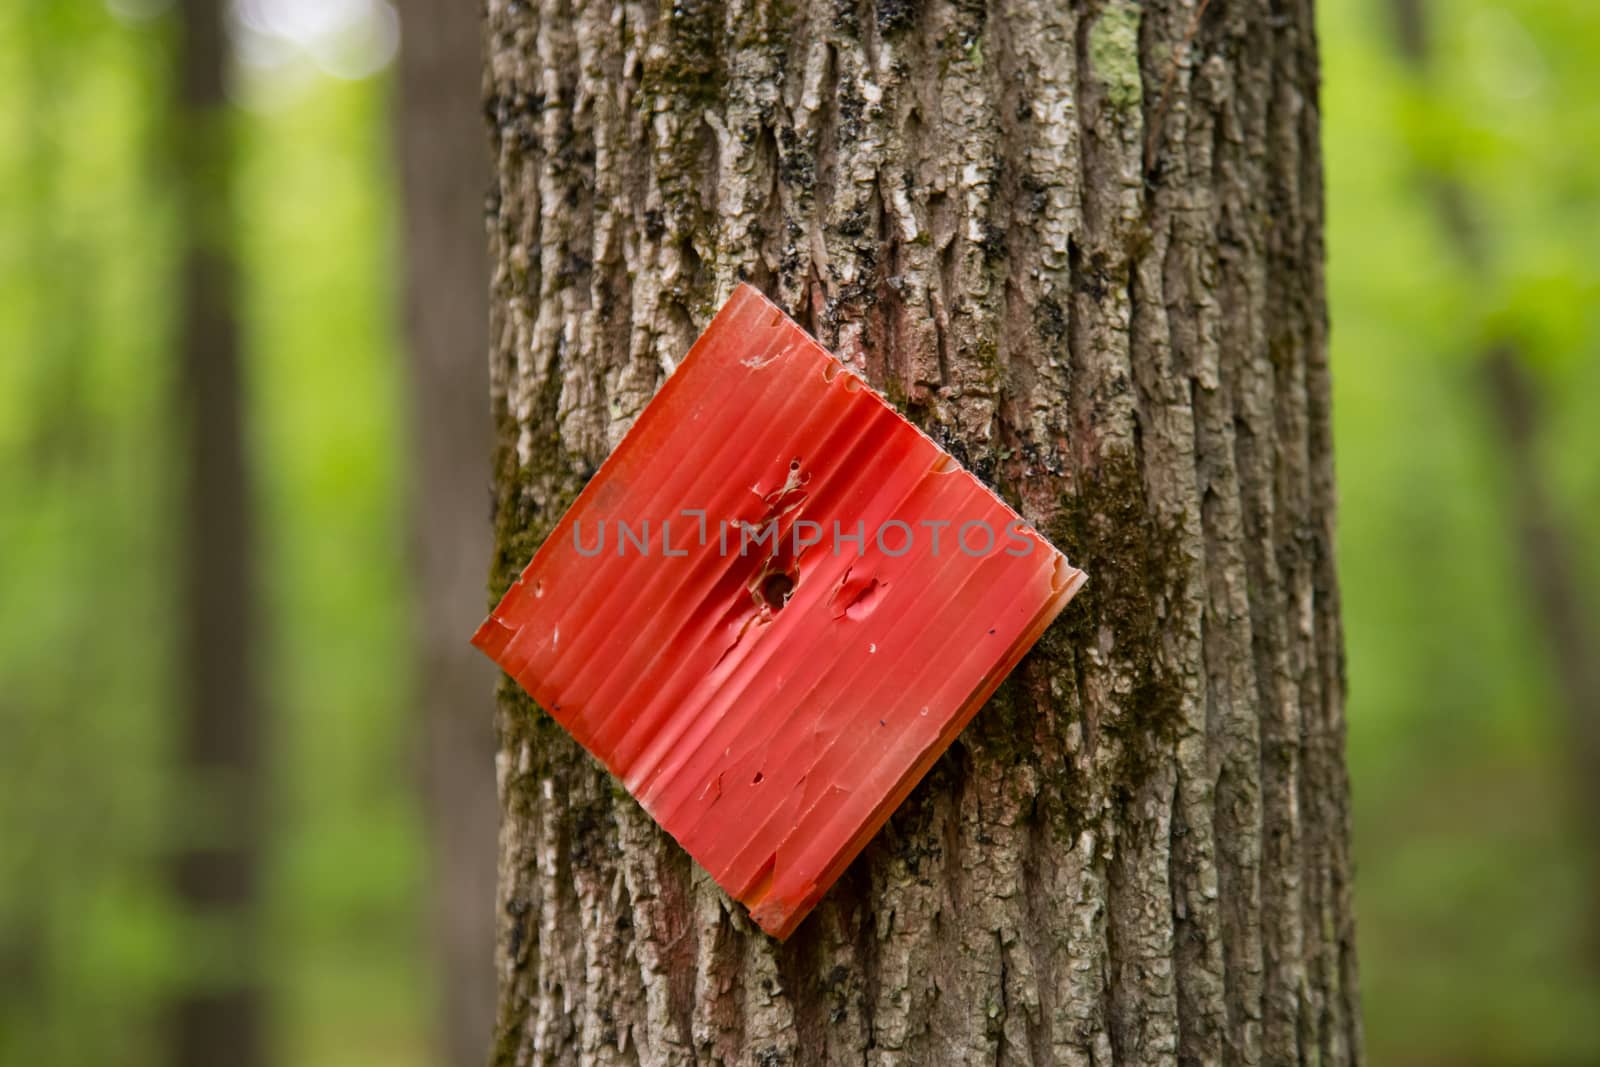 Red Trail Marker on a Tree by colintemple